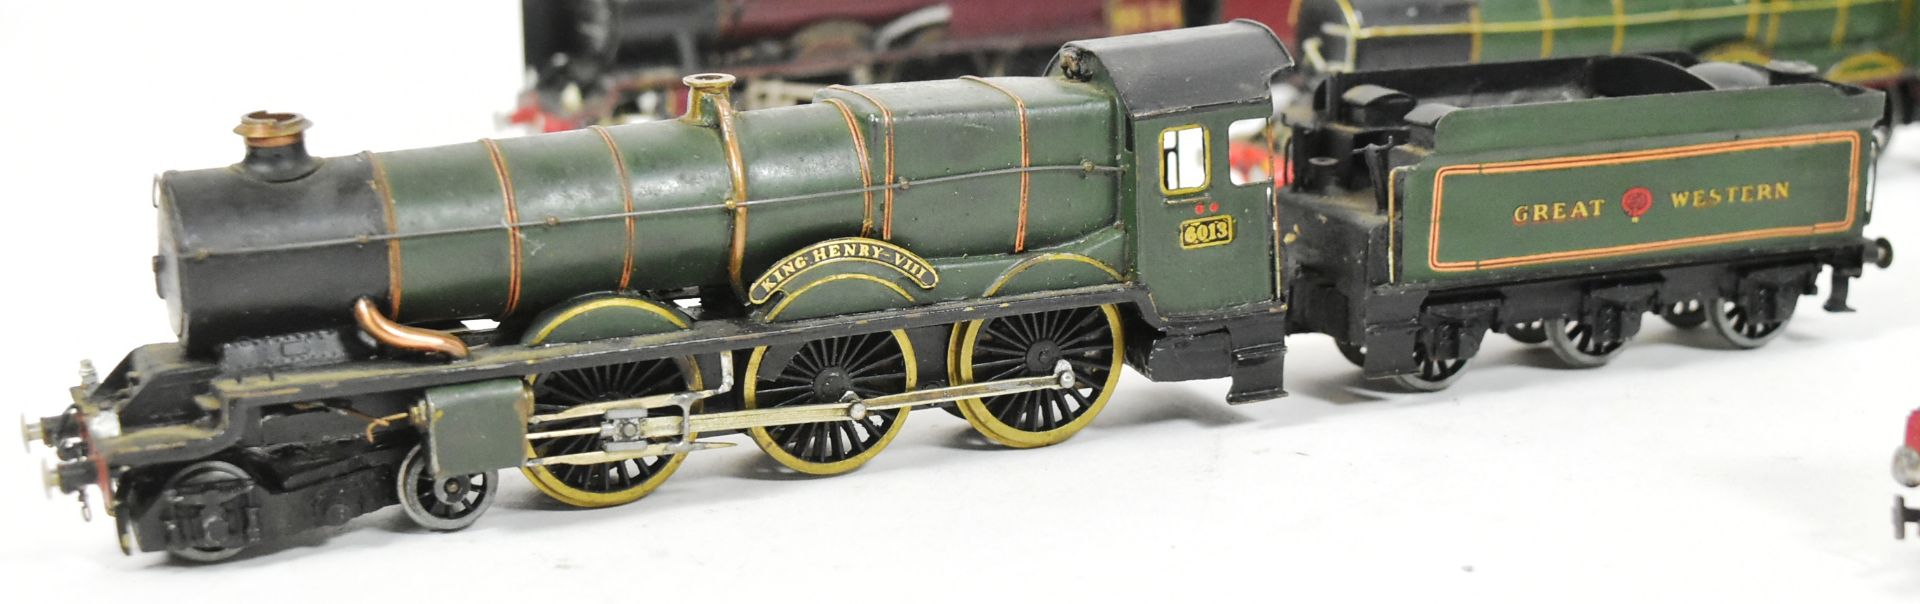 MODEL RAILWAY - COLLECTION OF KIT BUILT LOCOMOTIVES - Image 6 of 6